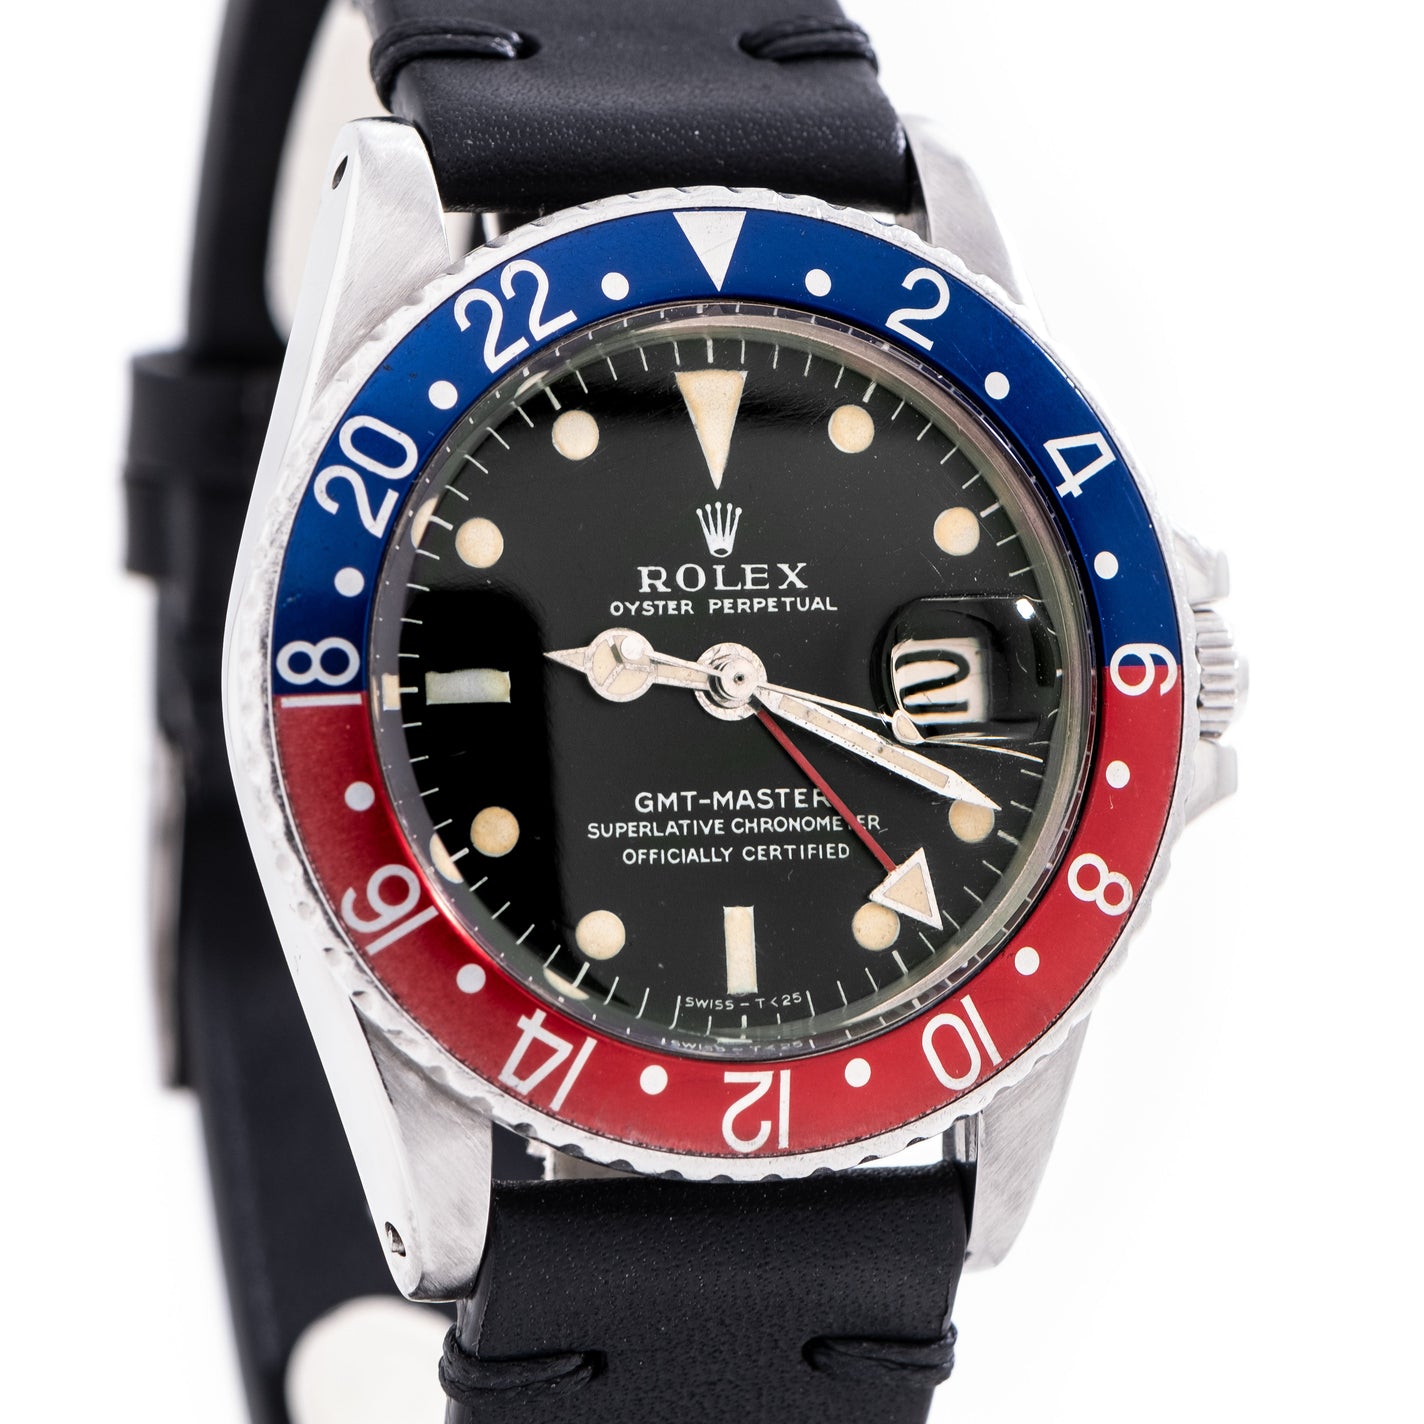 1967 Rolex GMT-MASTER "Long 1675 Stainless Steel Watch – Second Time Watch Company